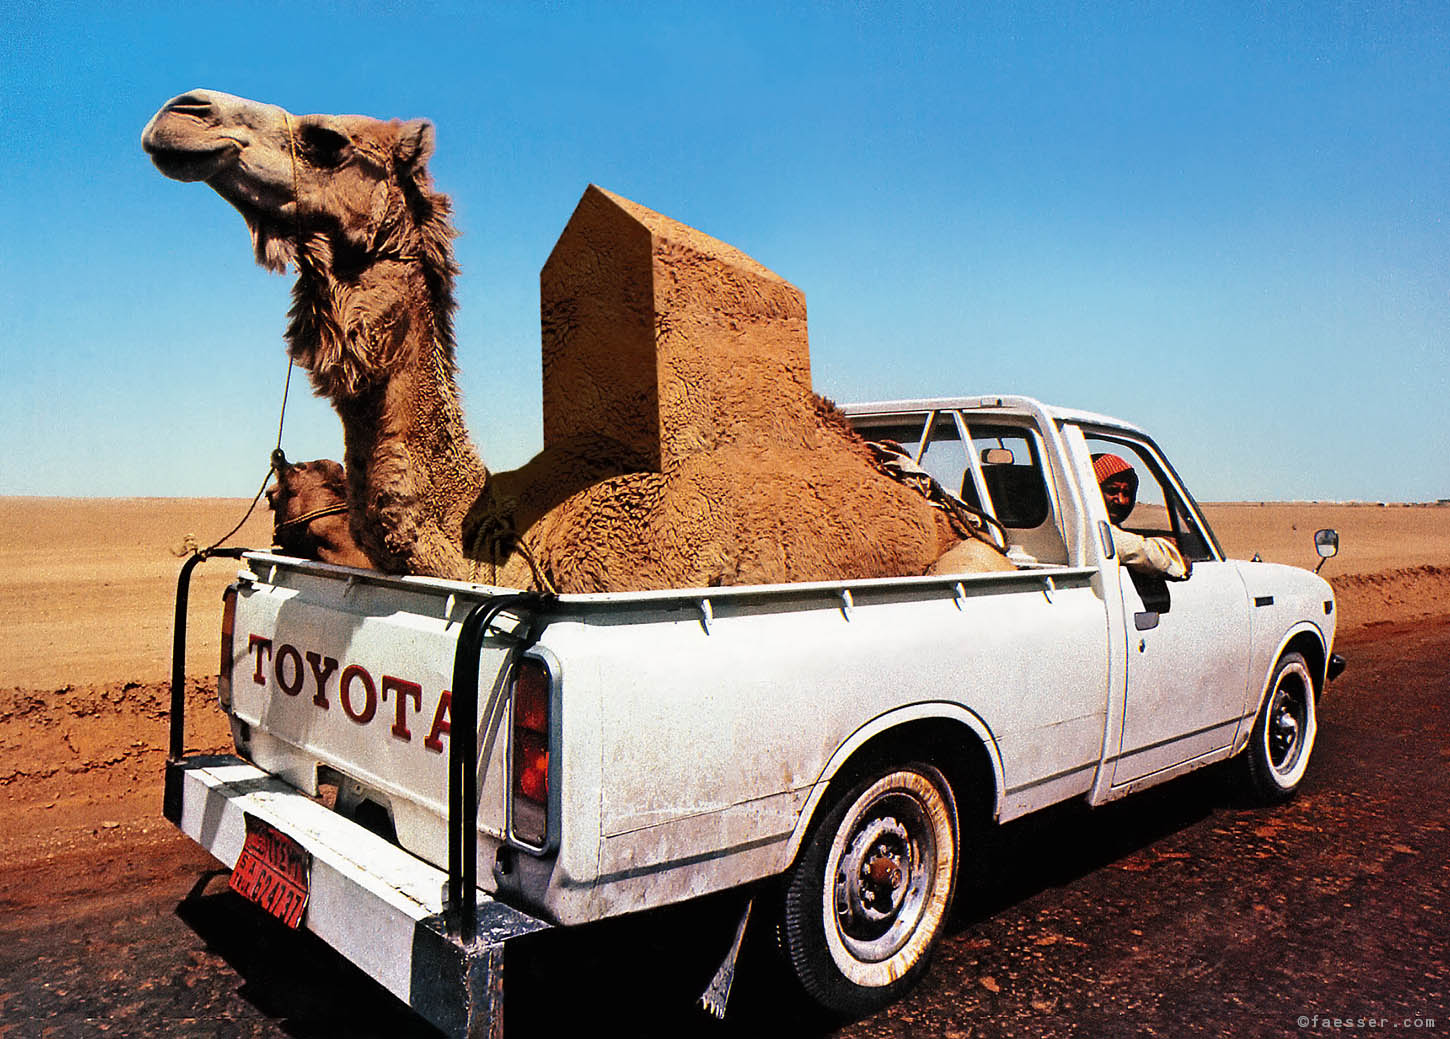 Camel with mutated house hump, transported in a Toyota pick up; artist Roland Faesser, sculptor and painter 1999